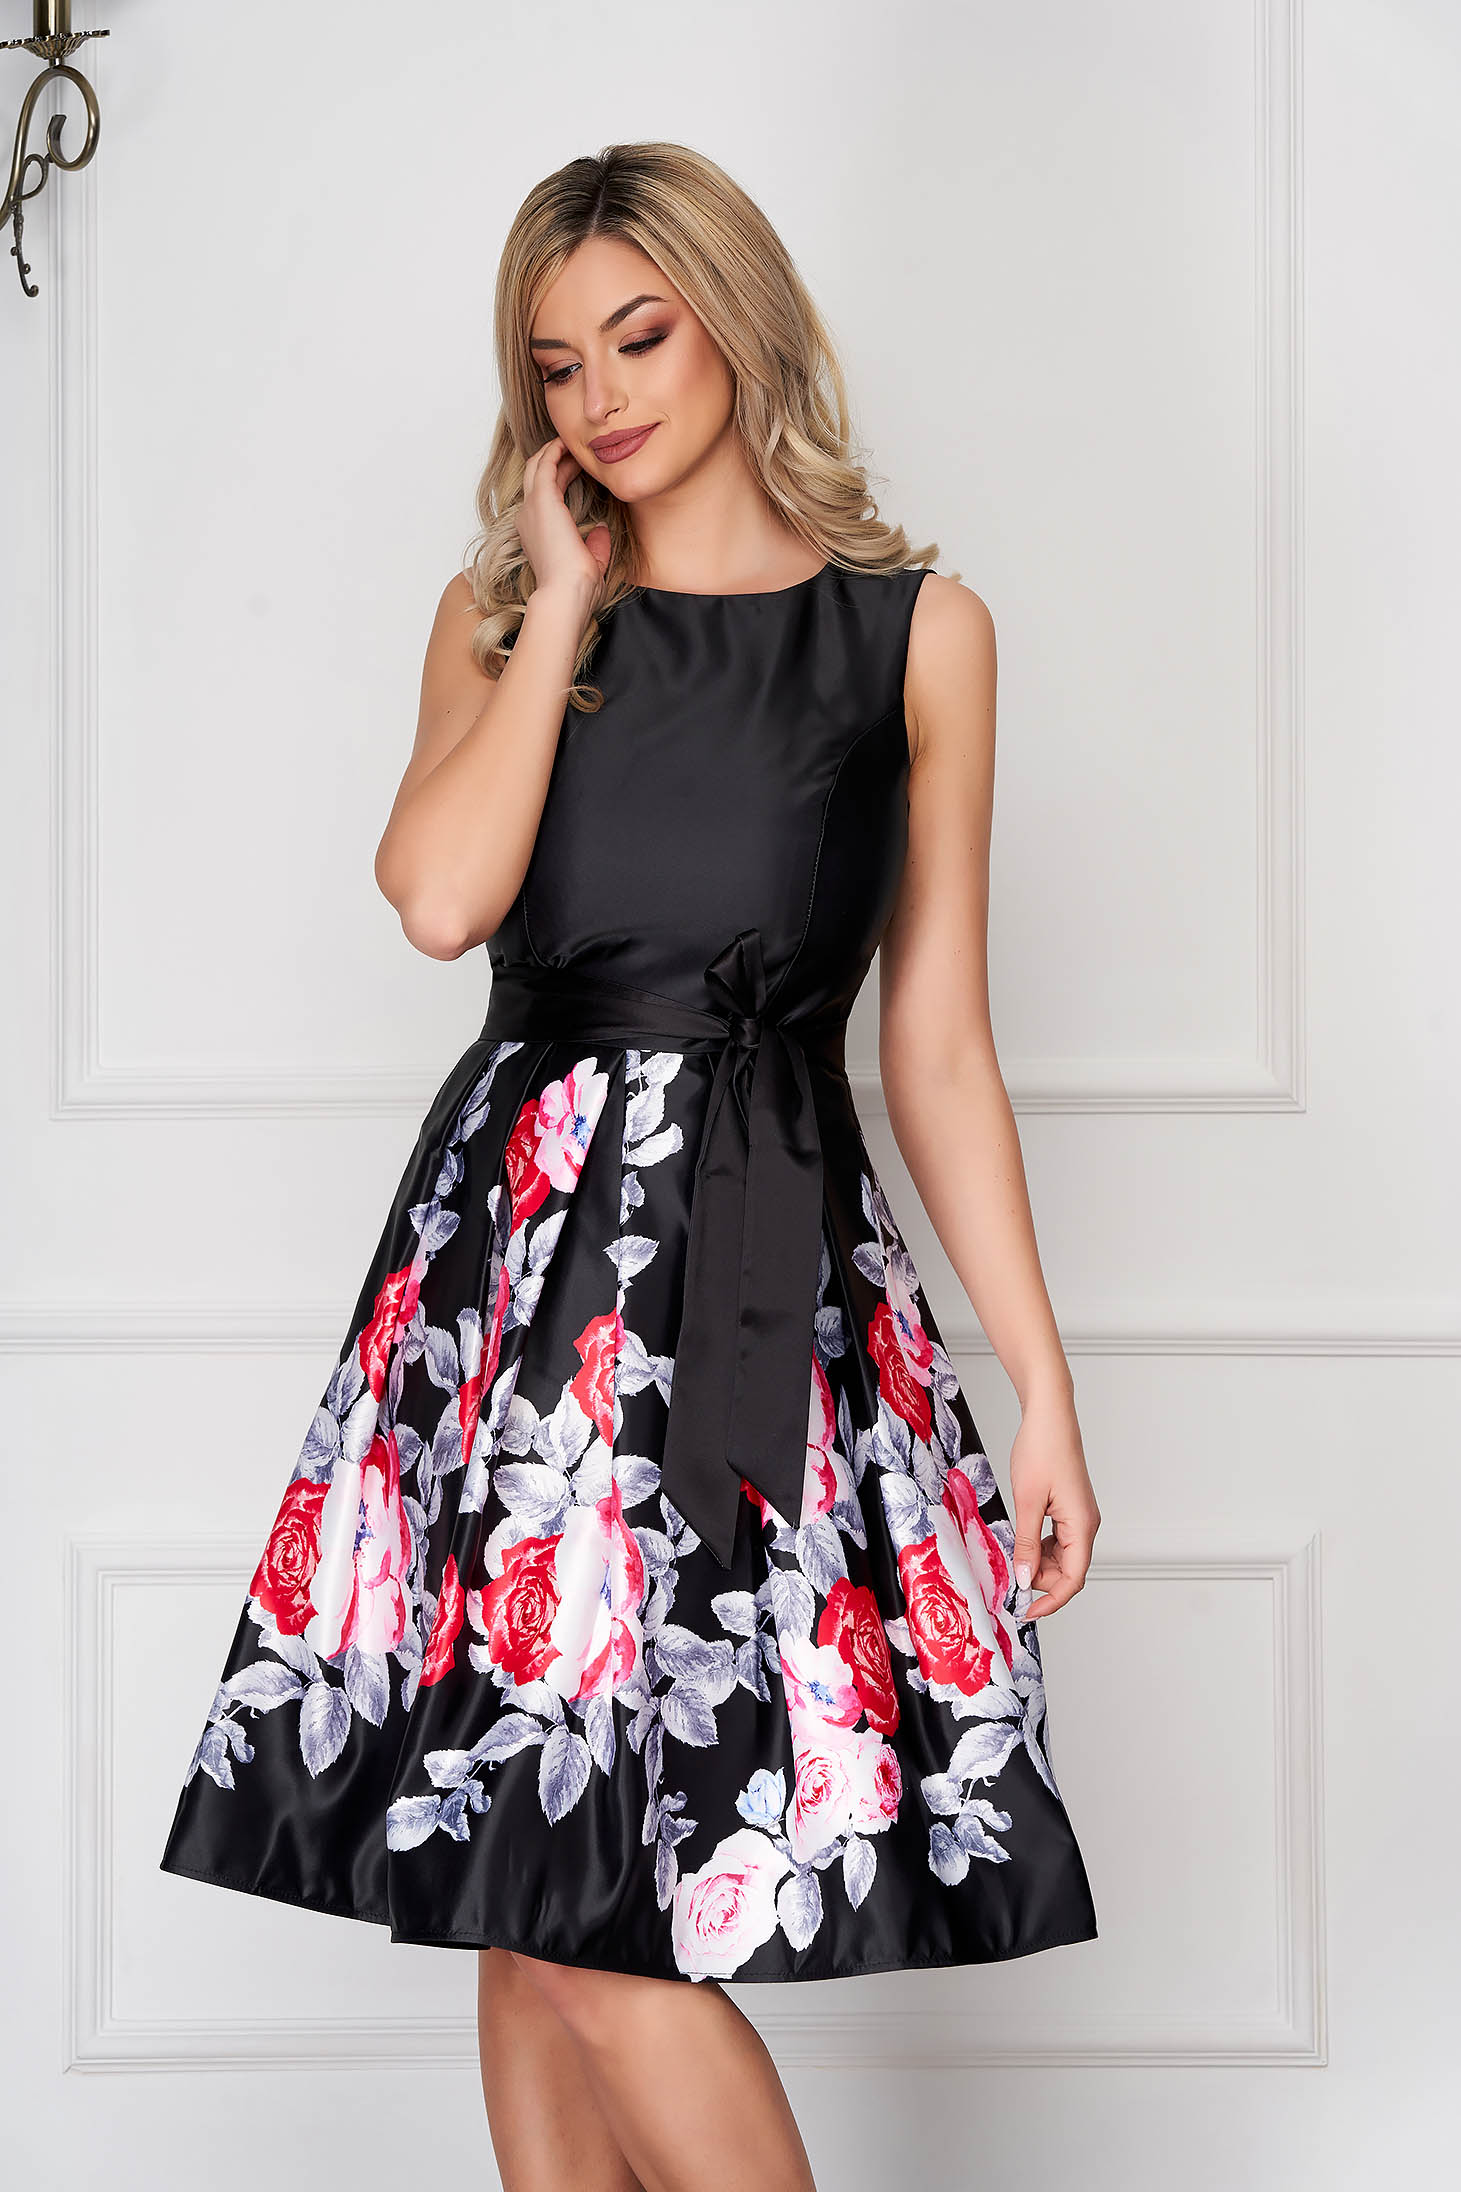 Pink dress occasional midi from satin sleeveless with floral print